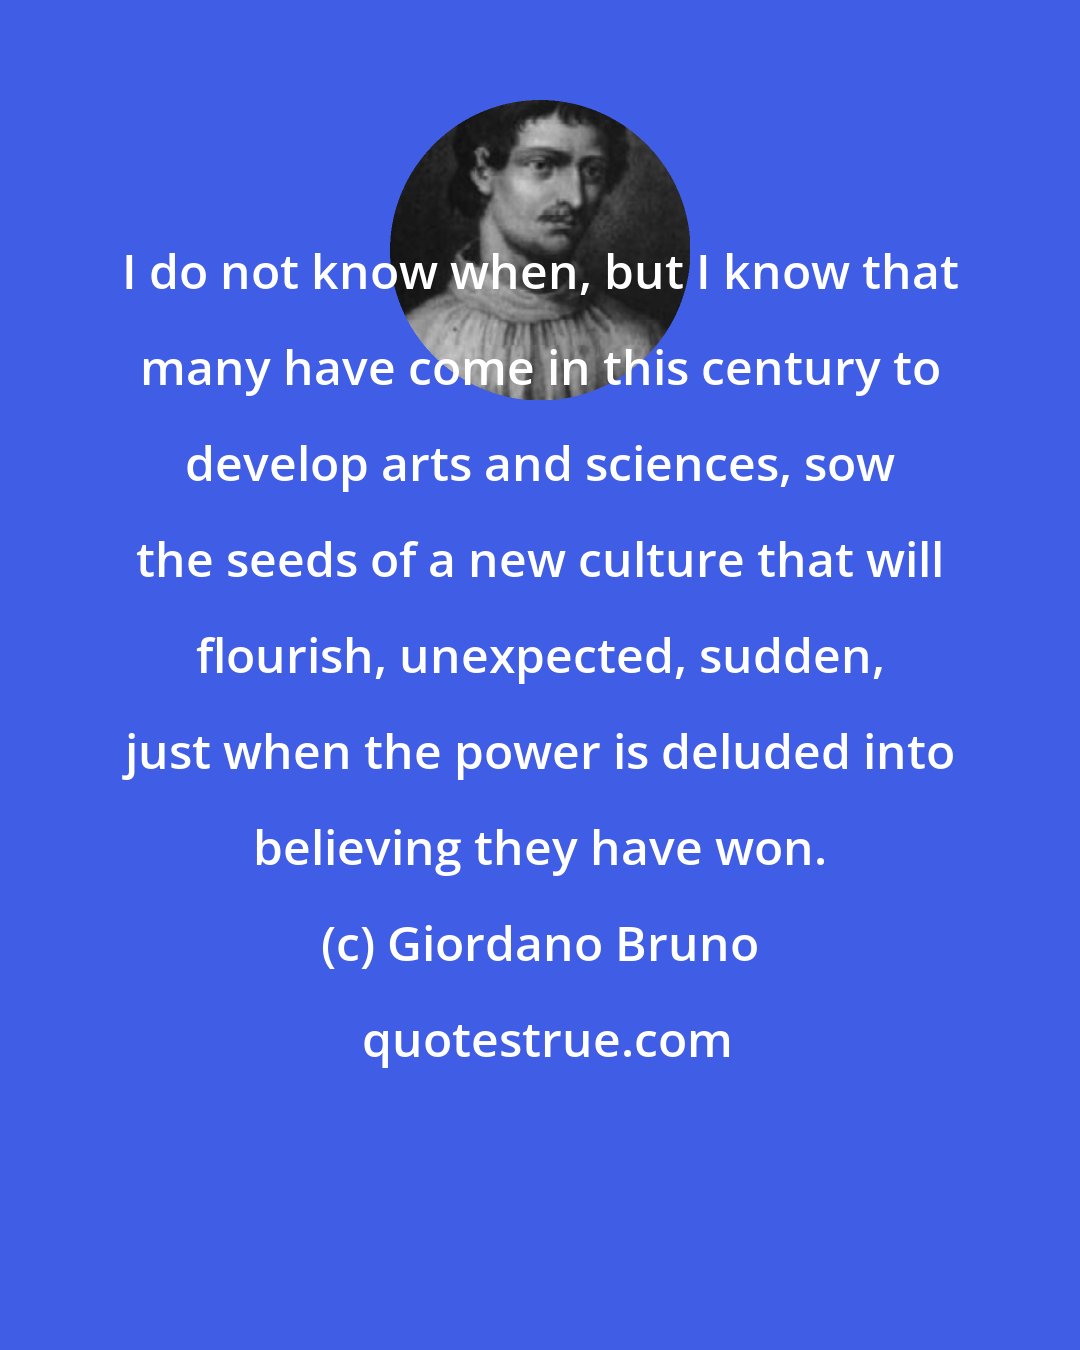 Giordano Bruno: I do not know when, but I know that many have come in this century to develop arts and sciences, sow the seeds of a new culture that will flourish, unexpected, sudden, just when the power is deluded into believing they have won.